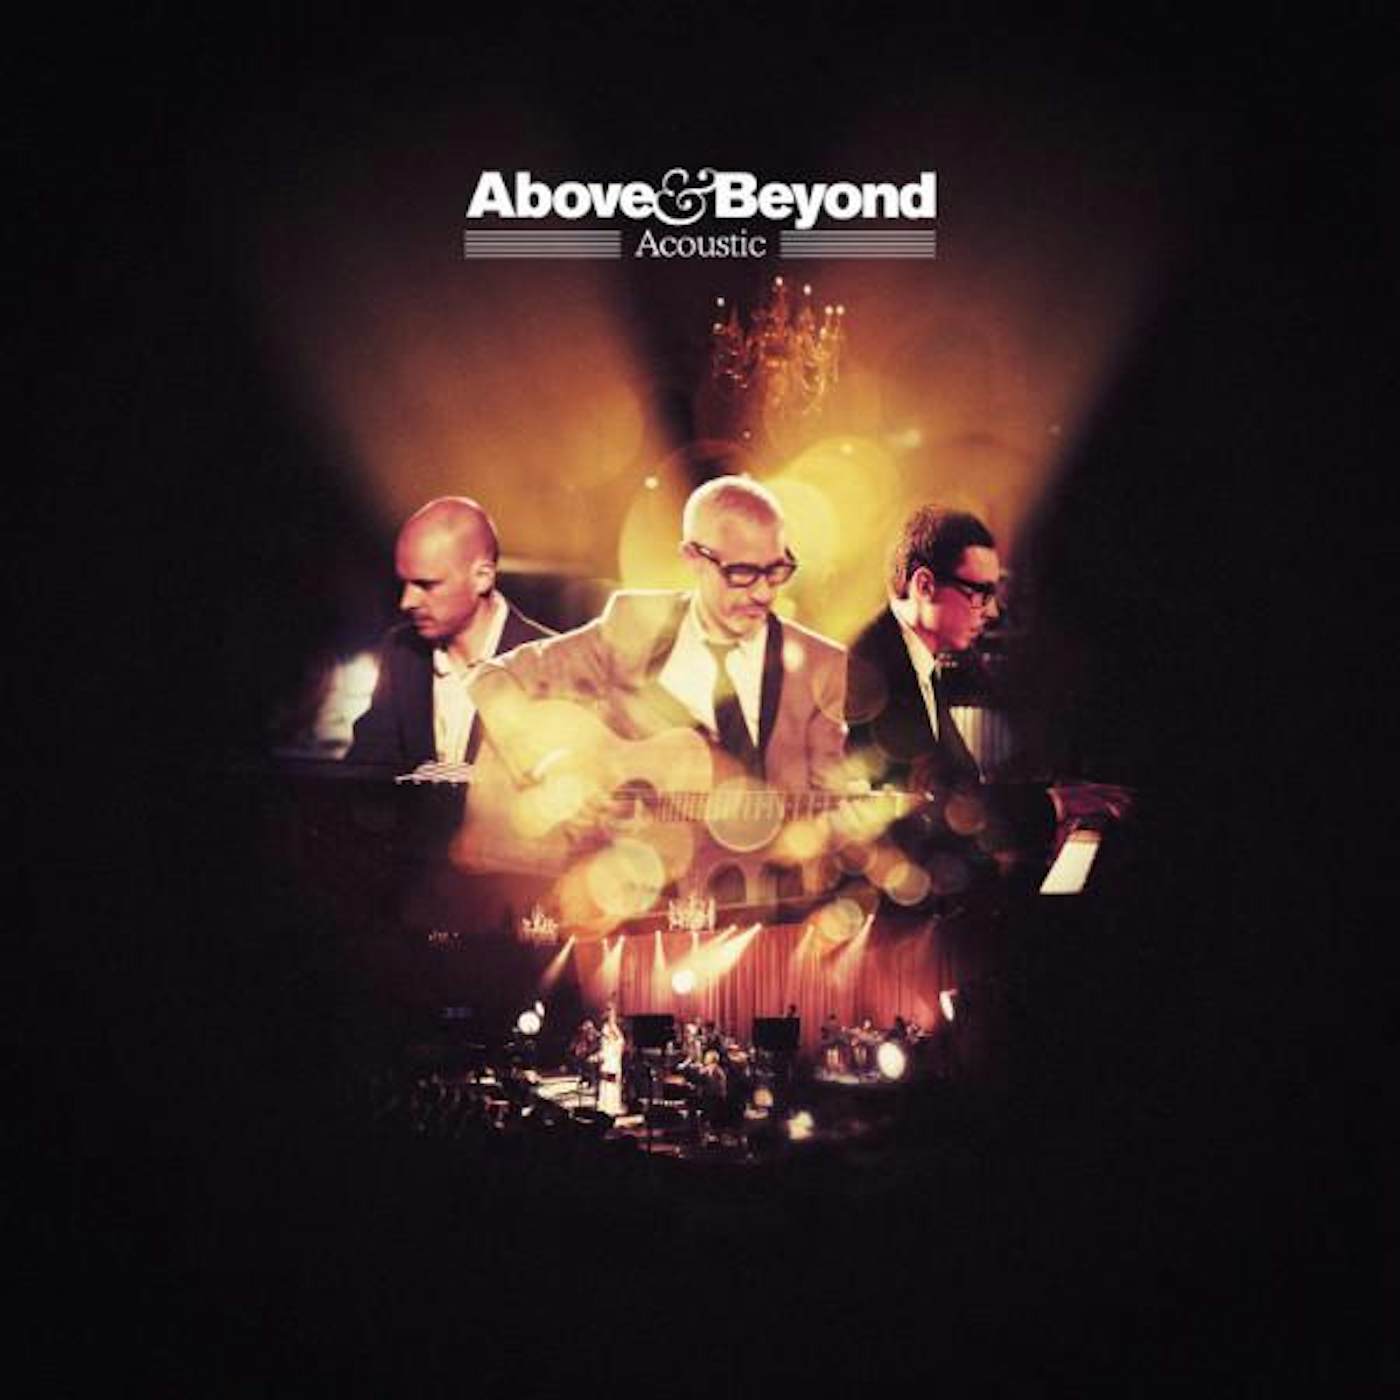 MINISTRY OF SOUND: ABOVE & BEYOND ACOUSTIC (DELUXE/CD/DVD) CD